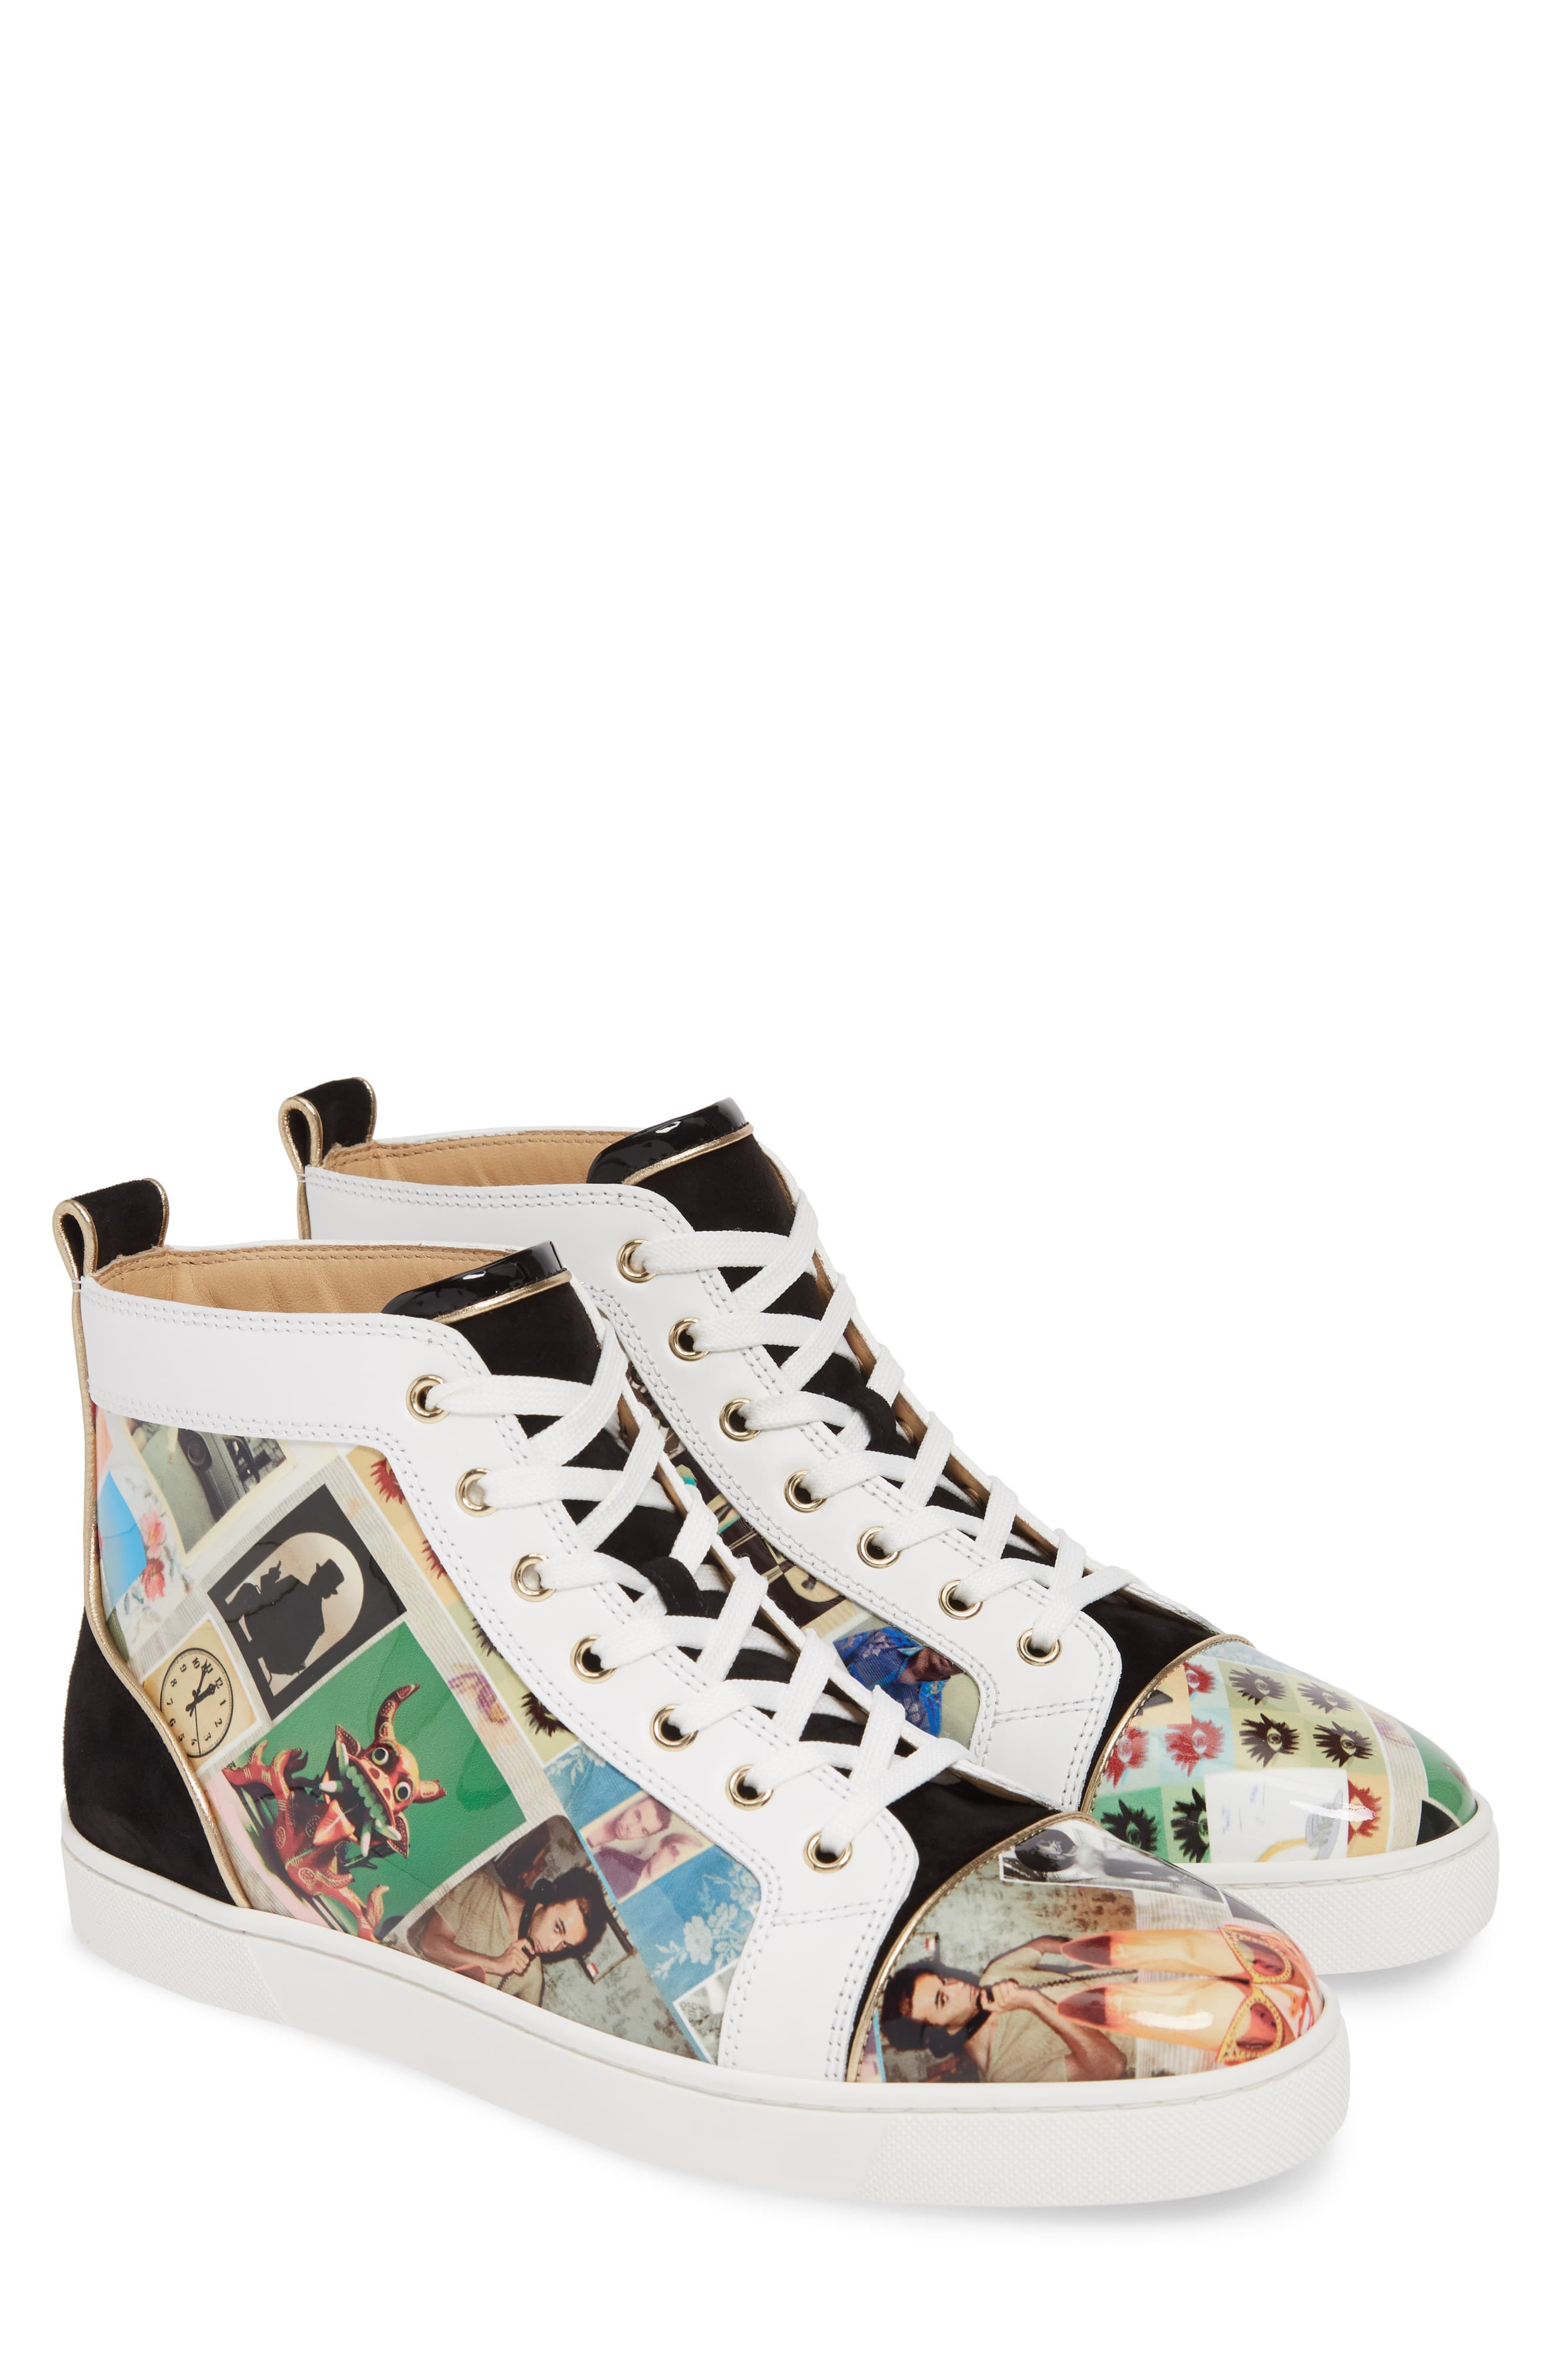 animation Absay Walter Cunningham Christian Louboutin Louis Orlato High Top Sneaker, $995 | Nordstrom |  Lookastic